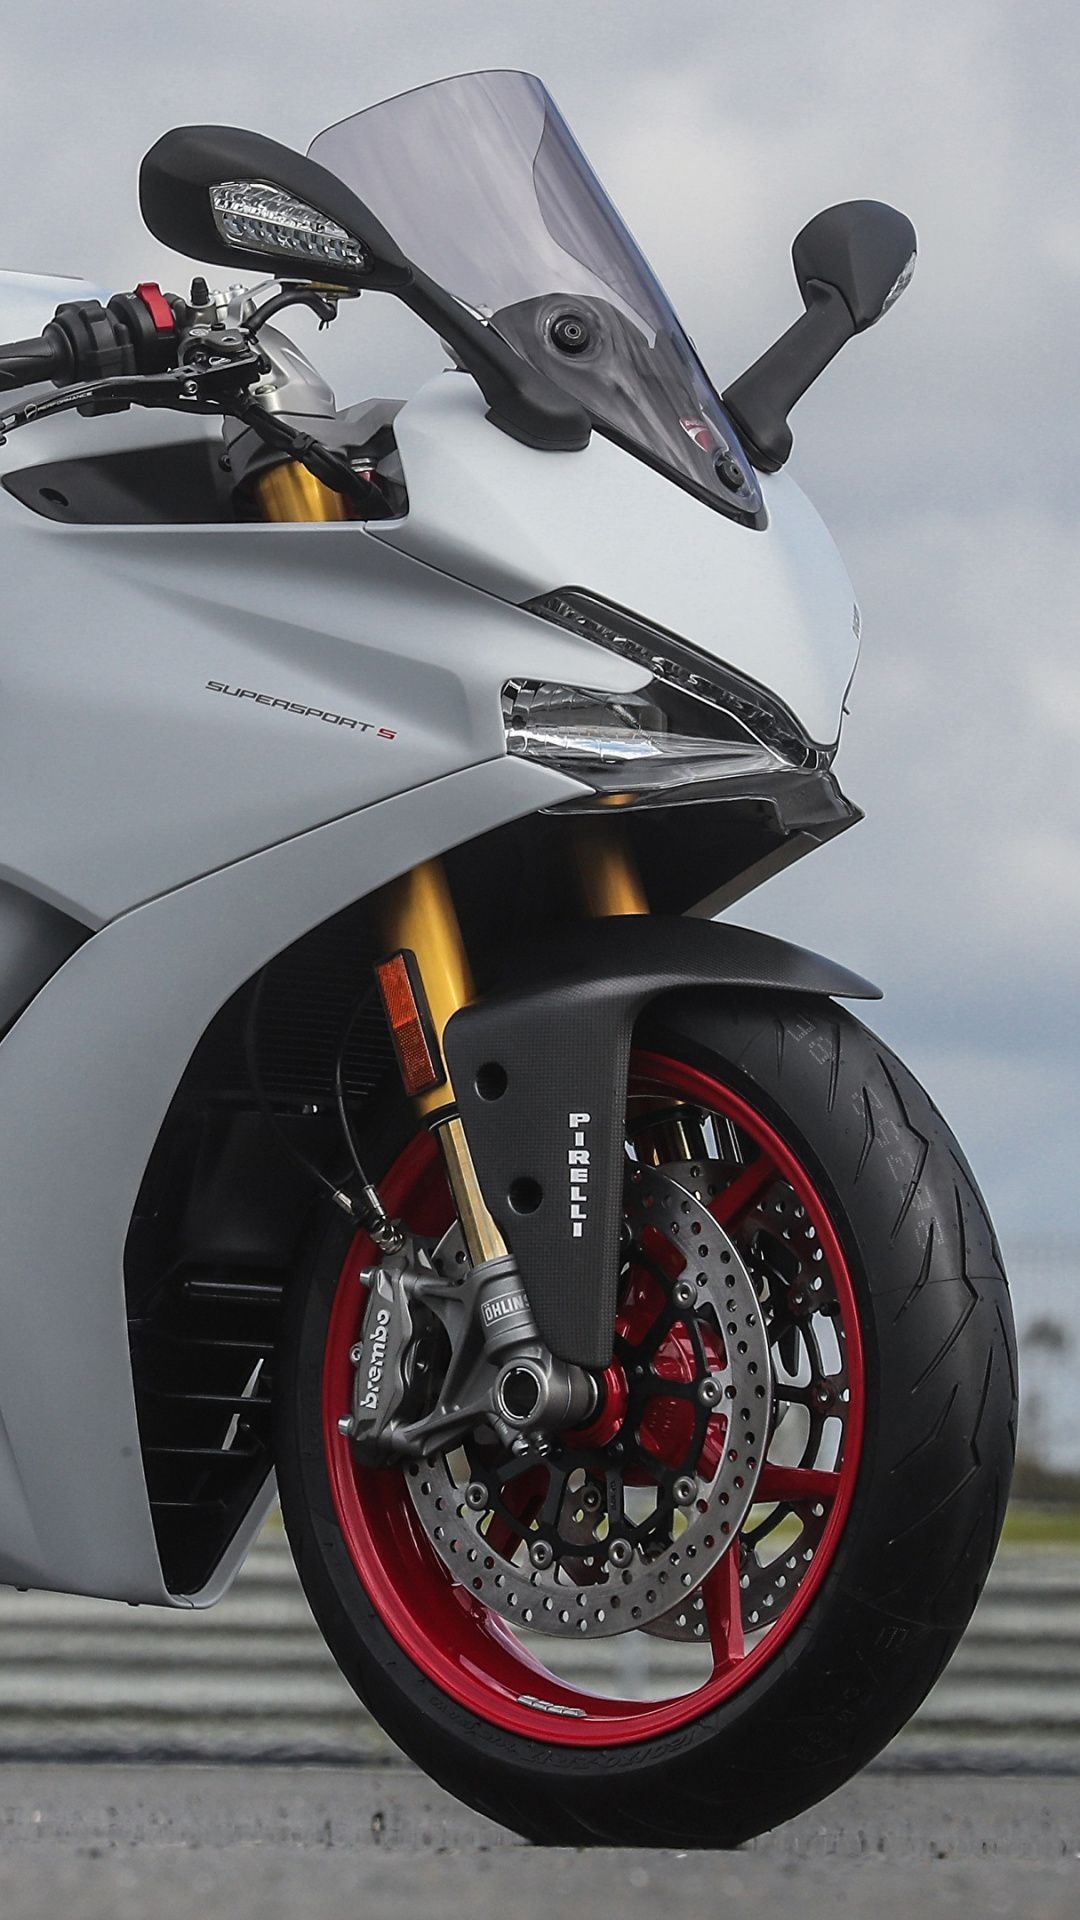 Ducati SuperSport, Speed and agility, Supersport excellence, Race track ready, 1080x1920 Full HD Phone